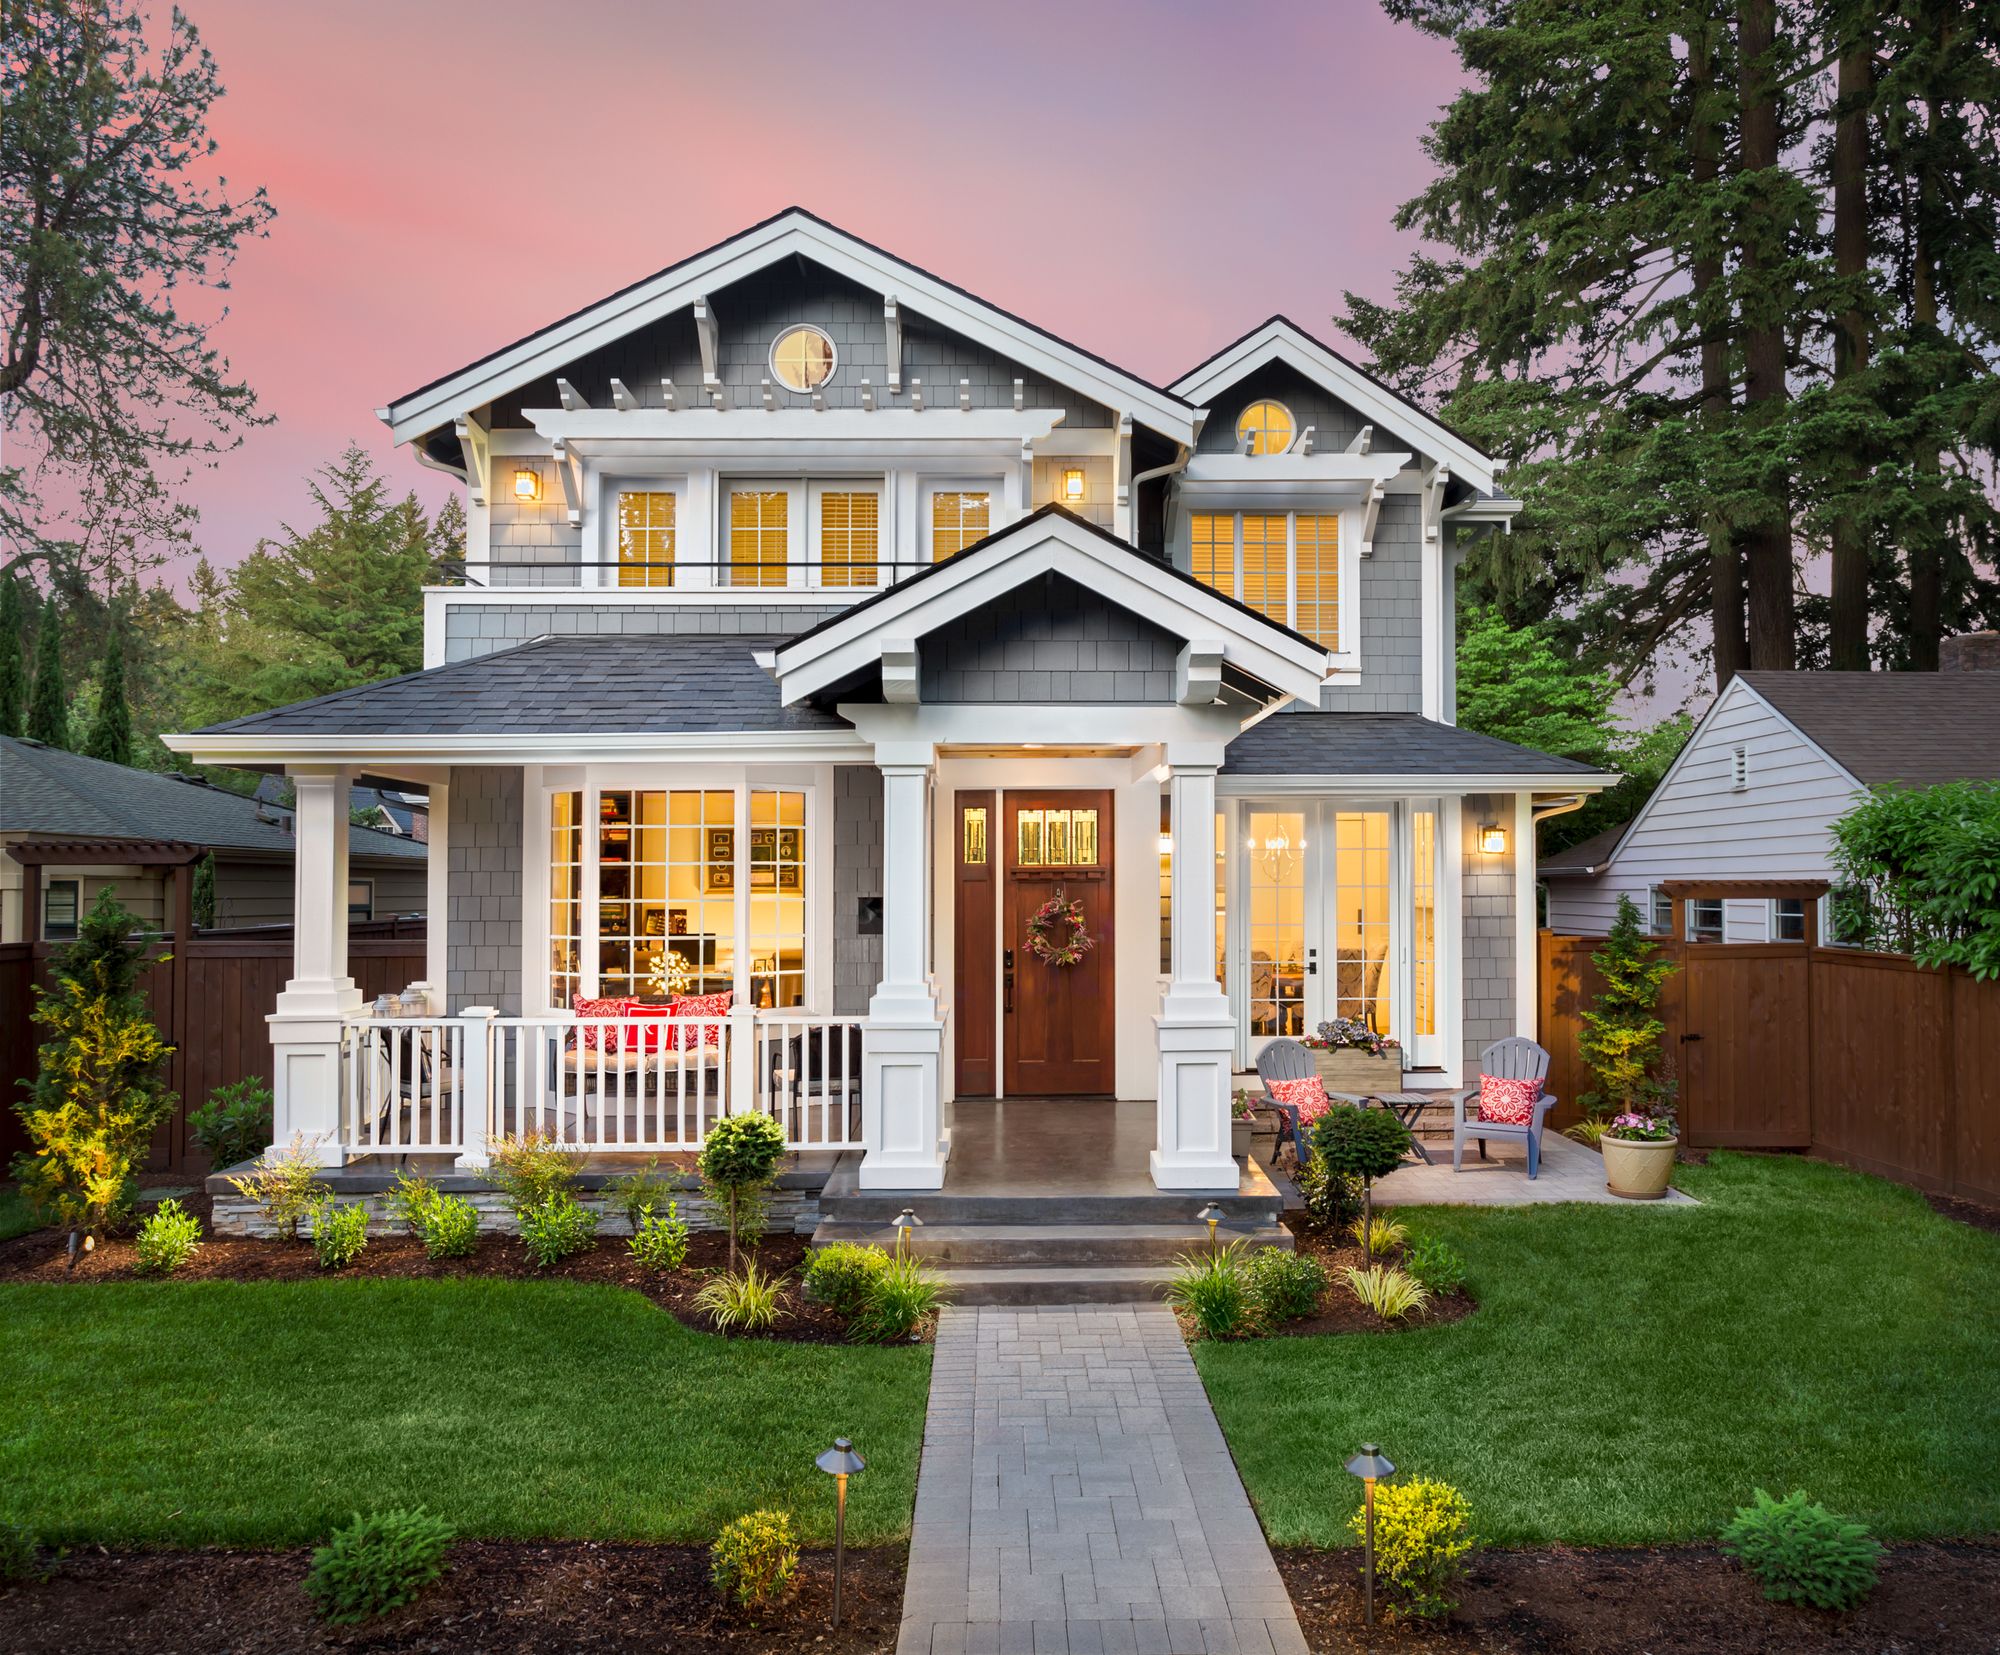 Tips On How To Find Your Dream Home